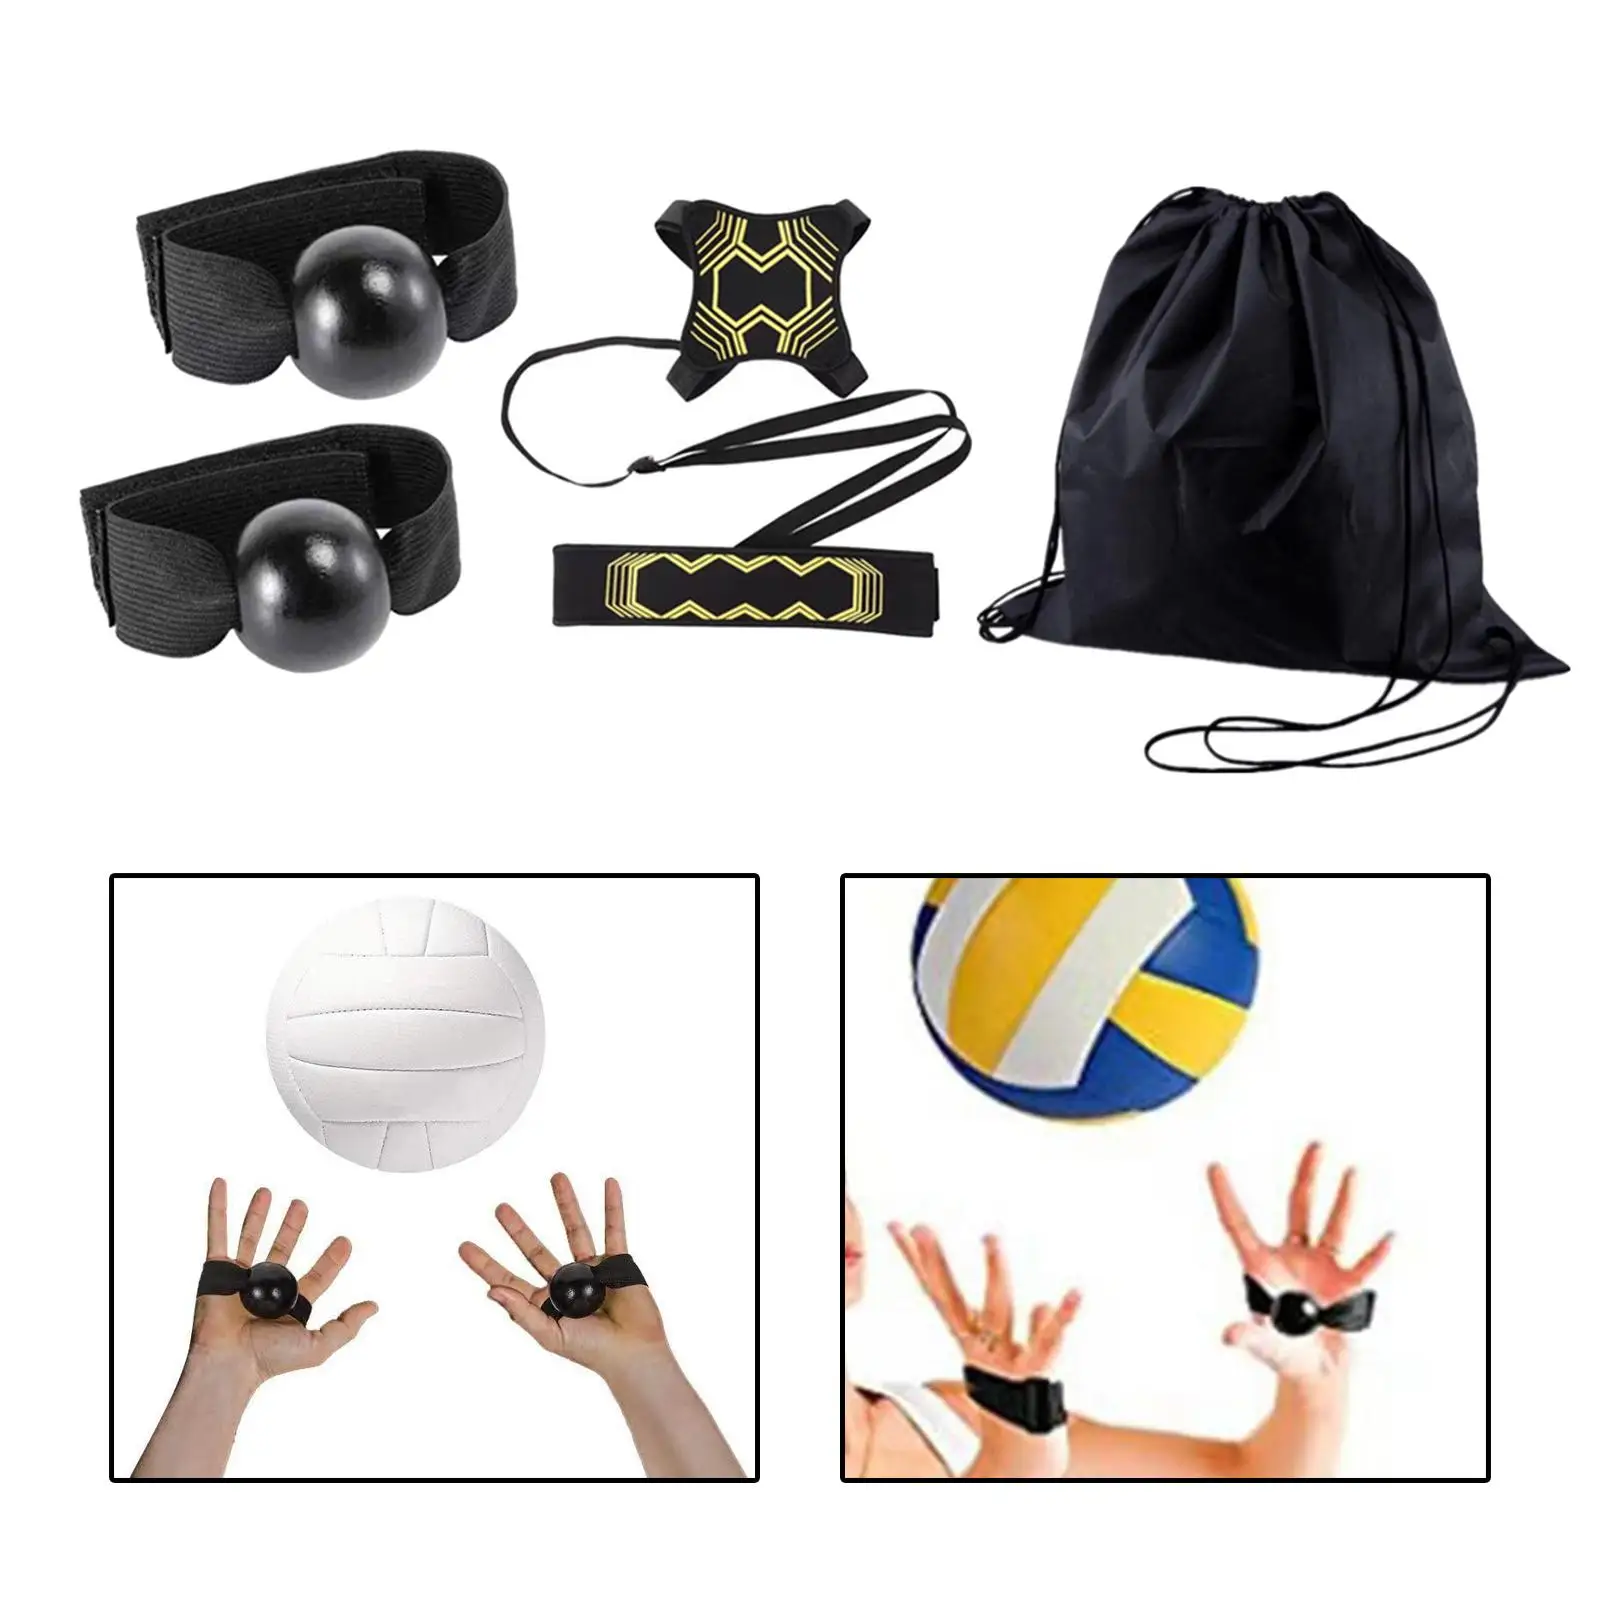 4x Volleyball Training Equipment Aid Volleyball Serve Trainer for Practicing